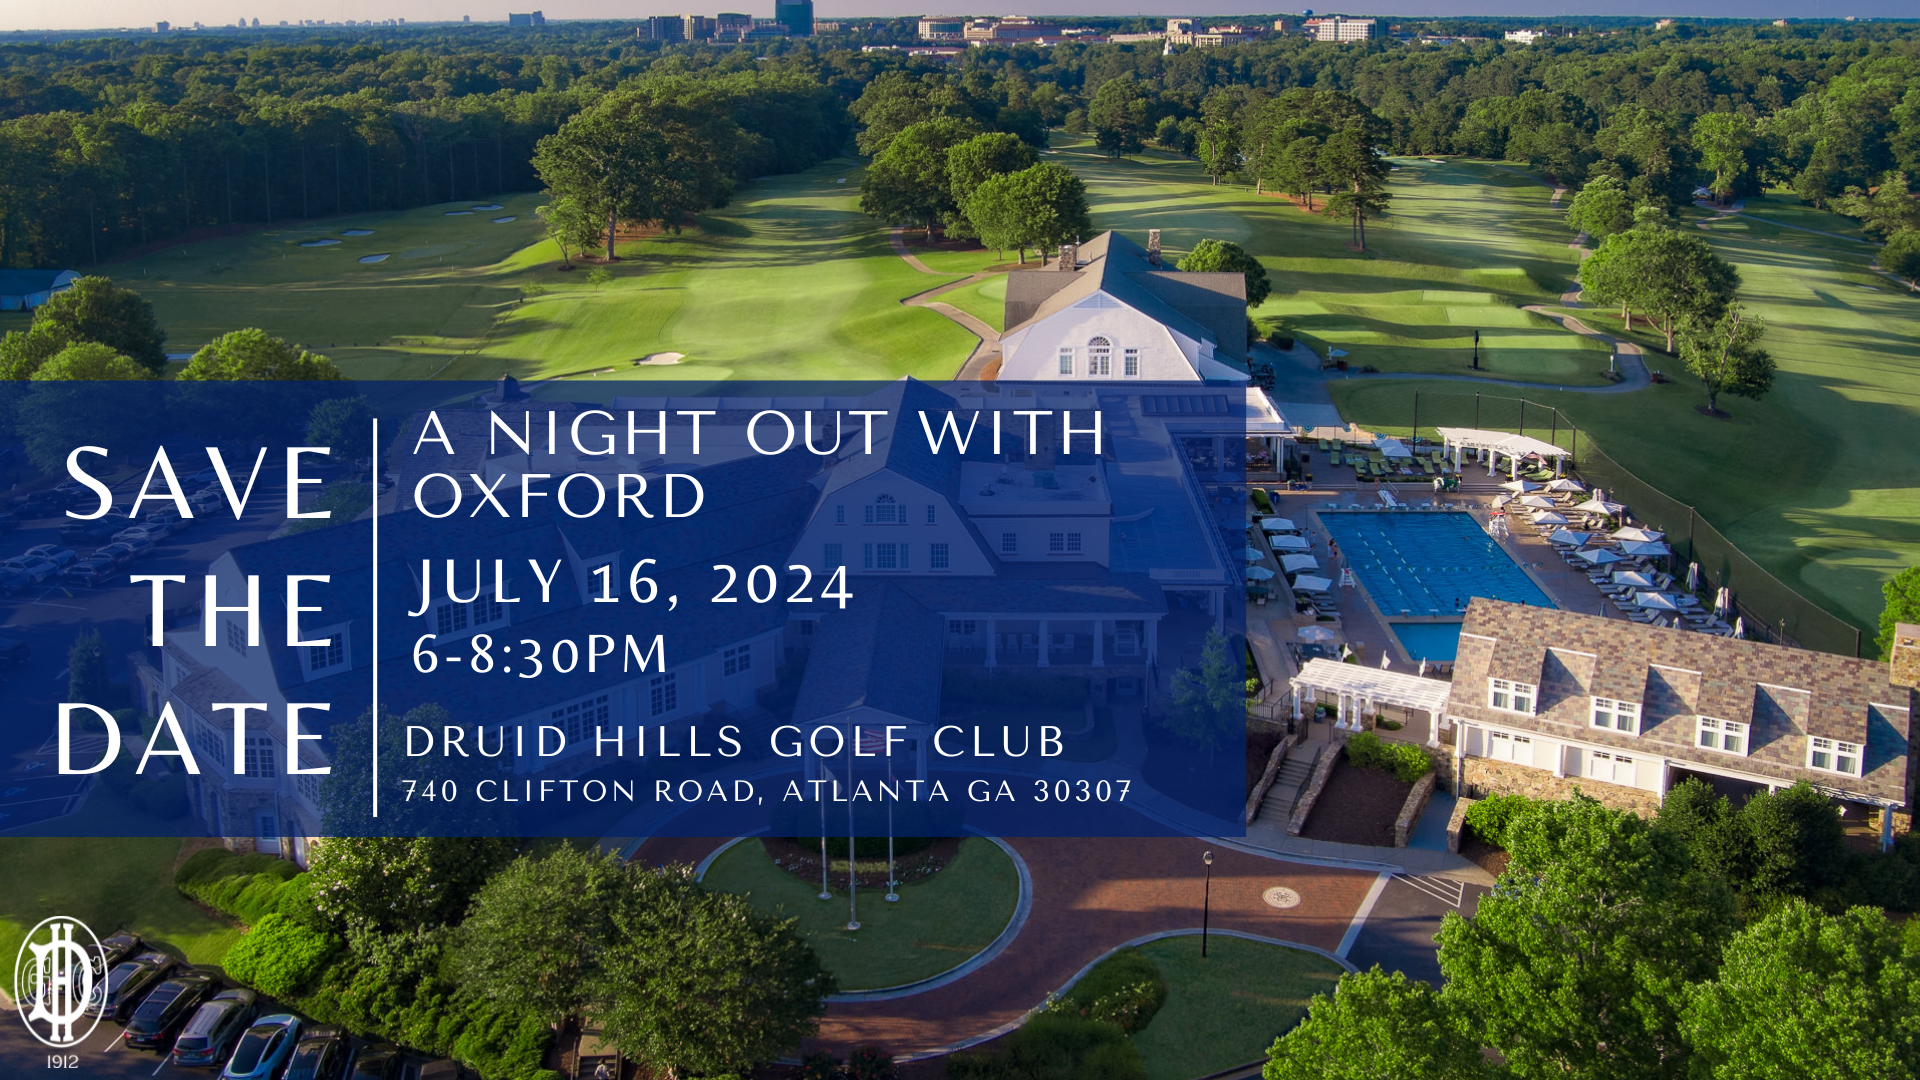 Save The Date!  A Night Out With Oxford July 16, 2024!